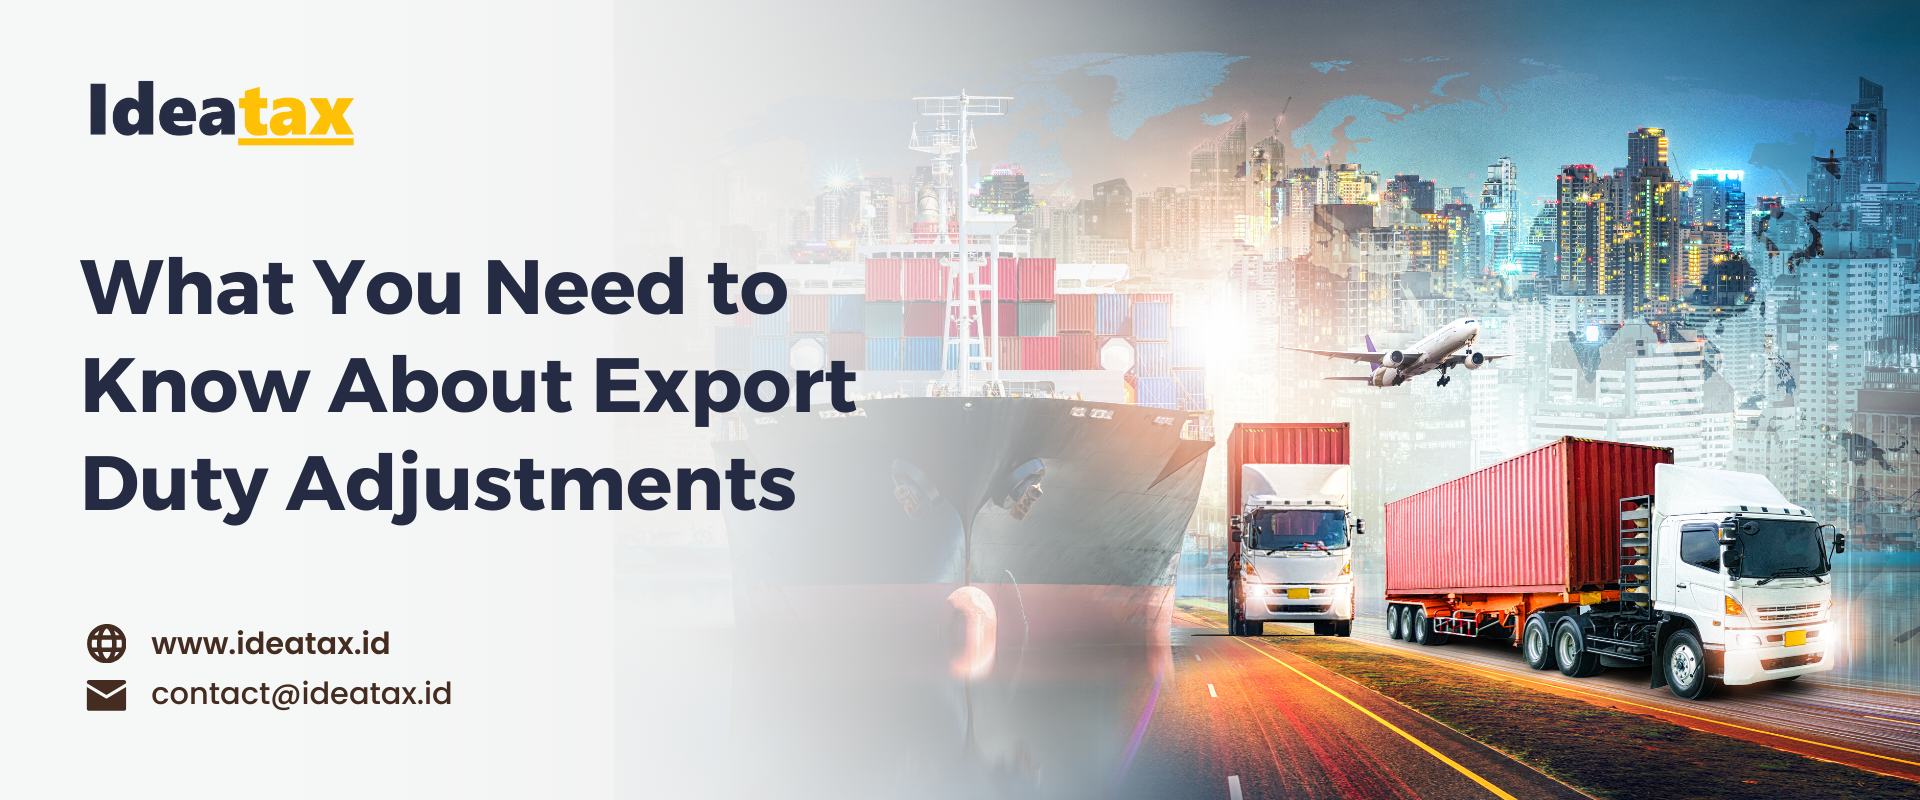 What You Need to Know About Export Duty Adjustments